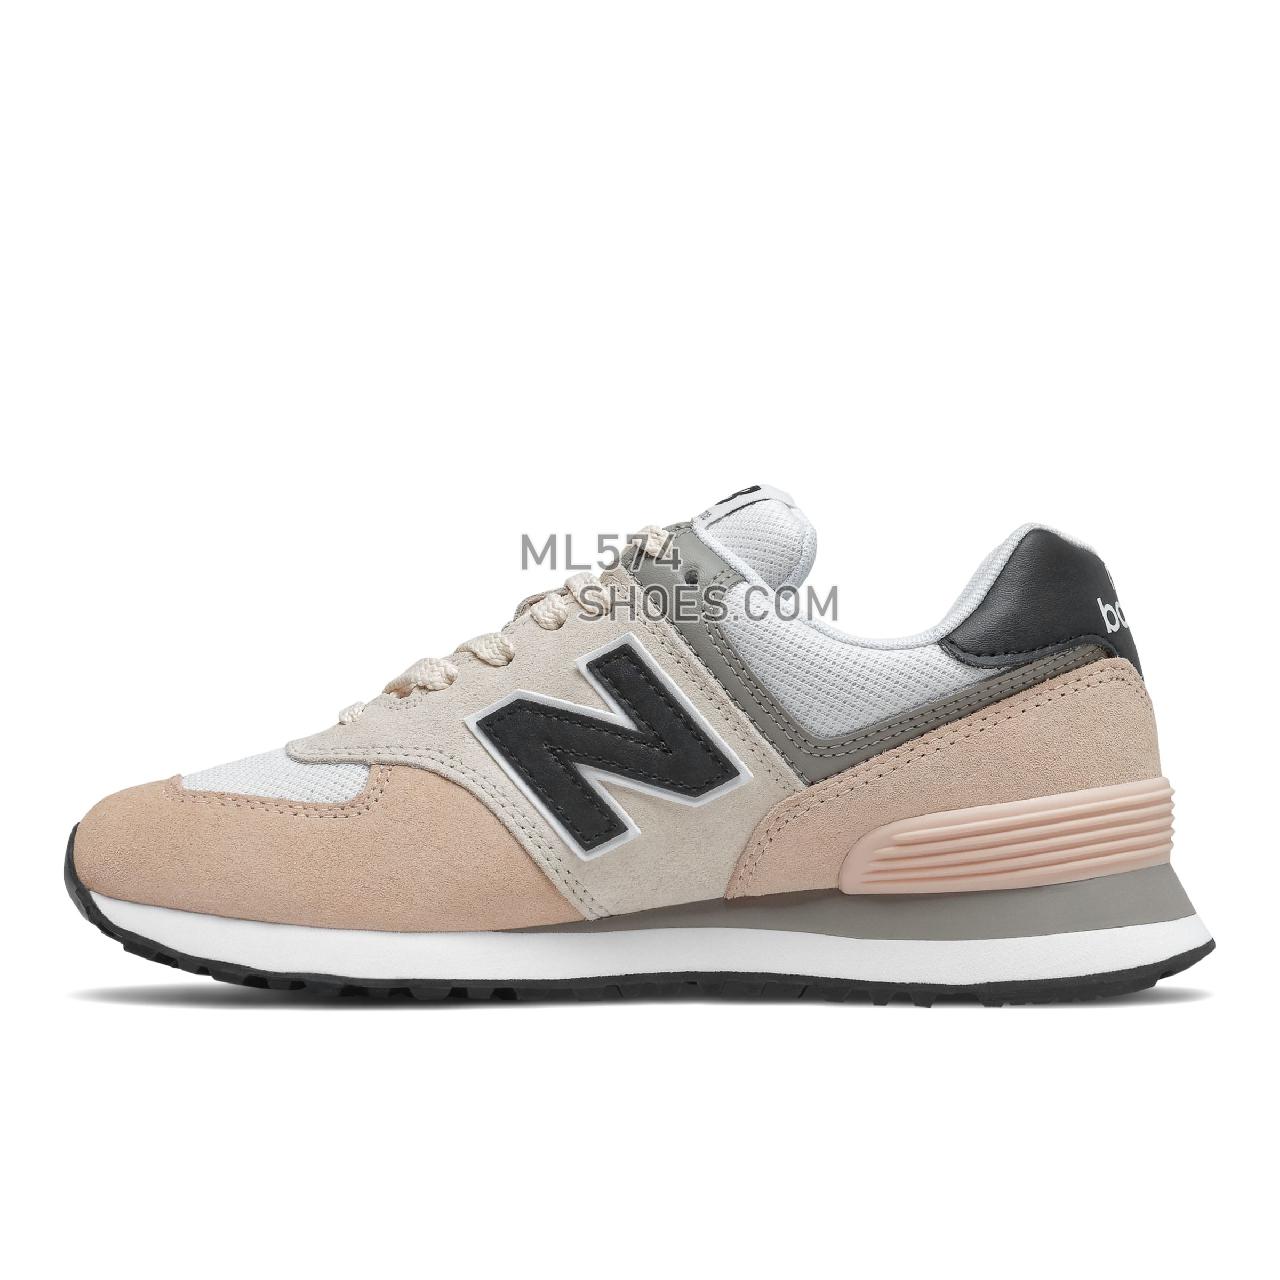 New Balance 574 - Women's Classic Sneakers - Rose Water with Black - WL574SK2